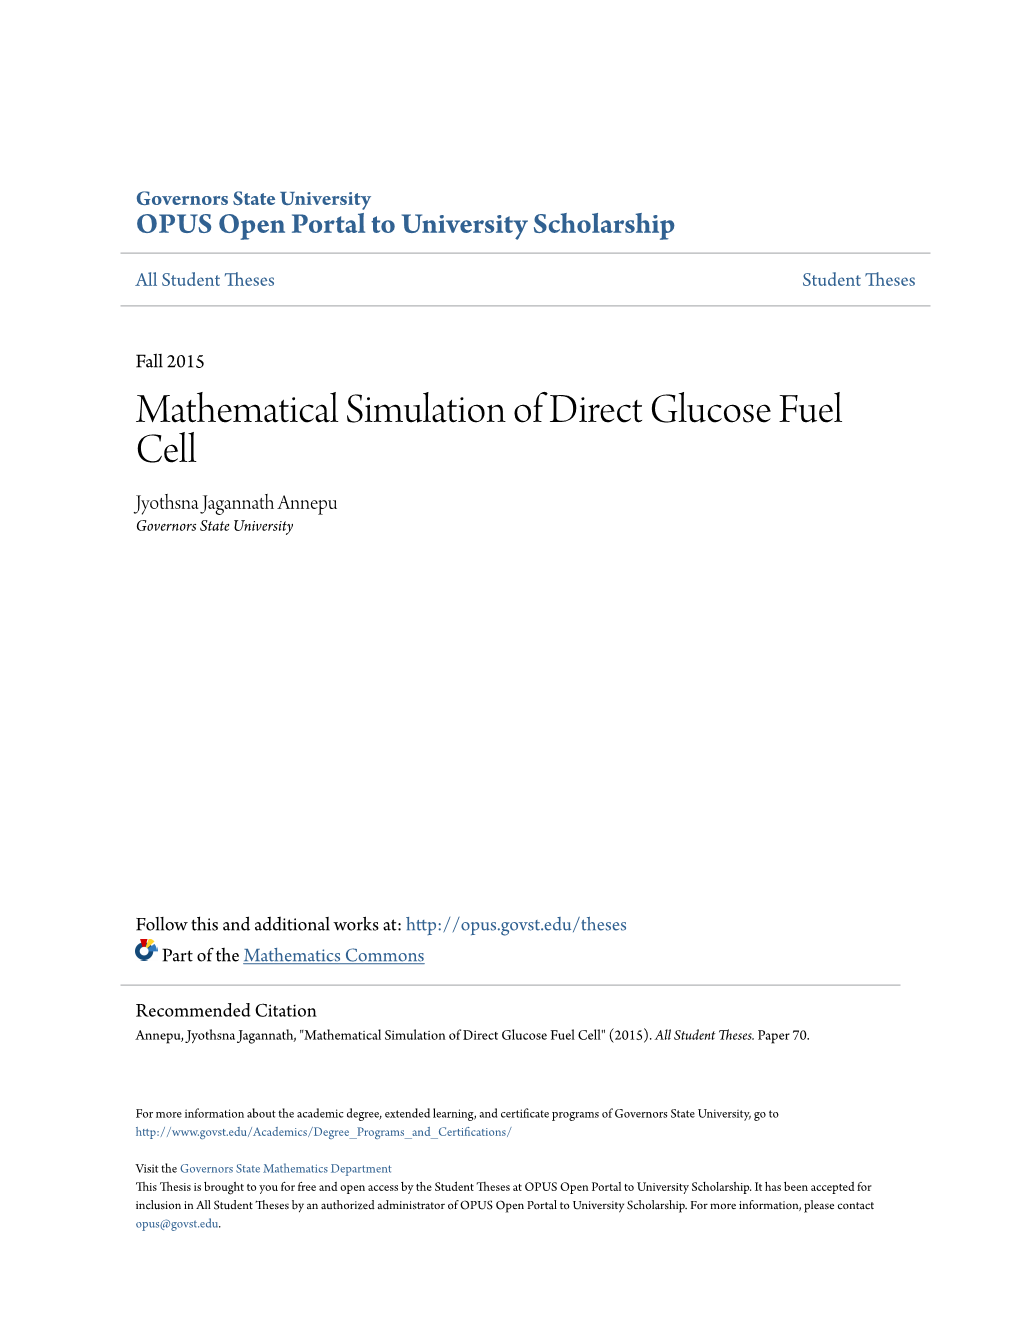 Mathematical Simulation of Direct Glucose Fuel Cell Jyothsna Jagannath Annepu Governors State University